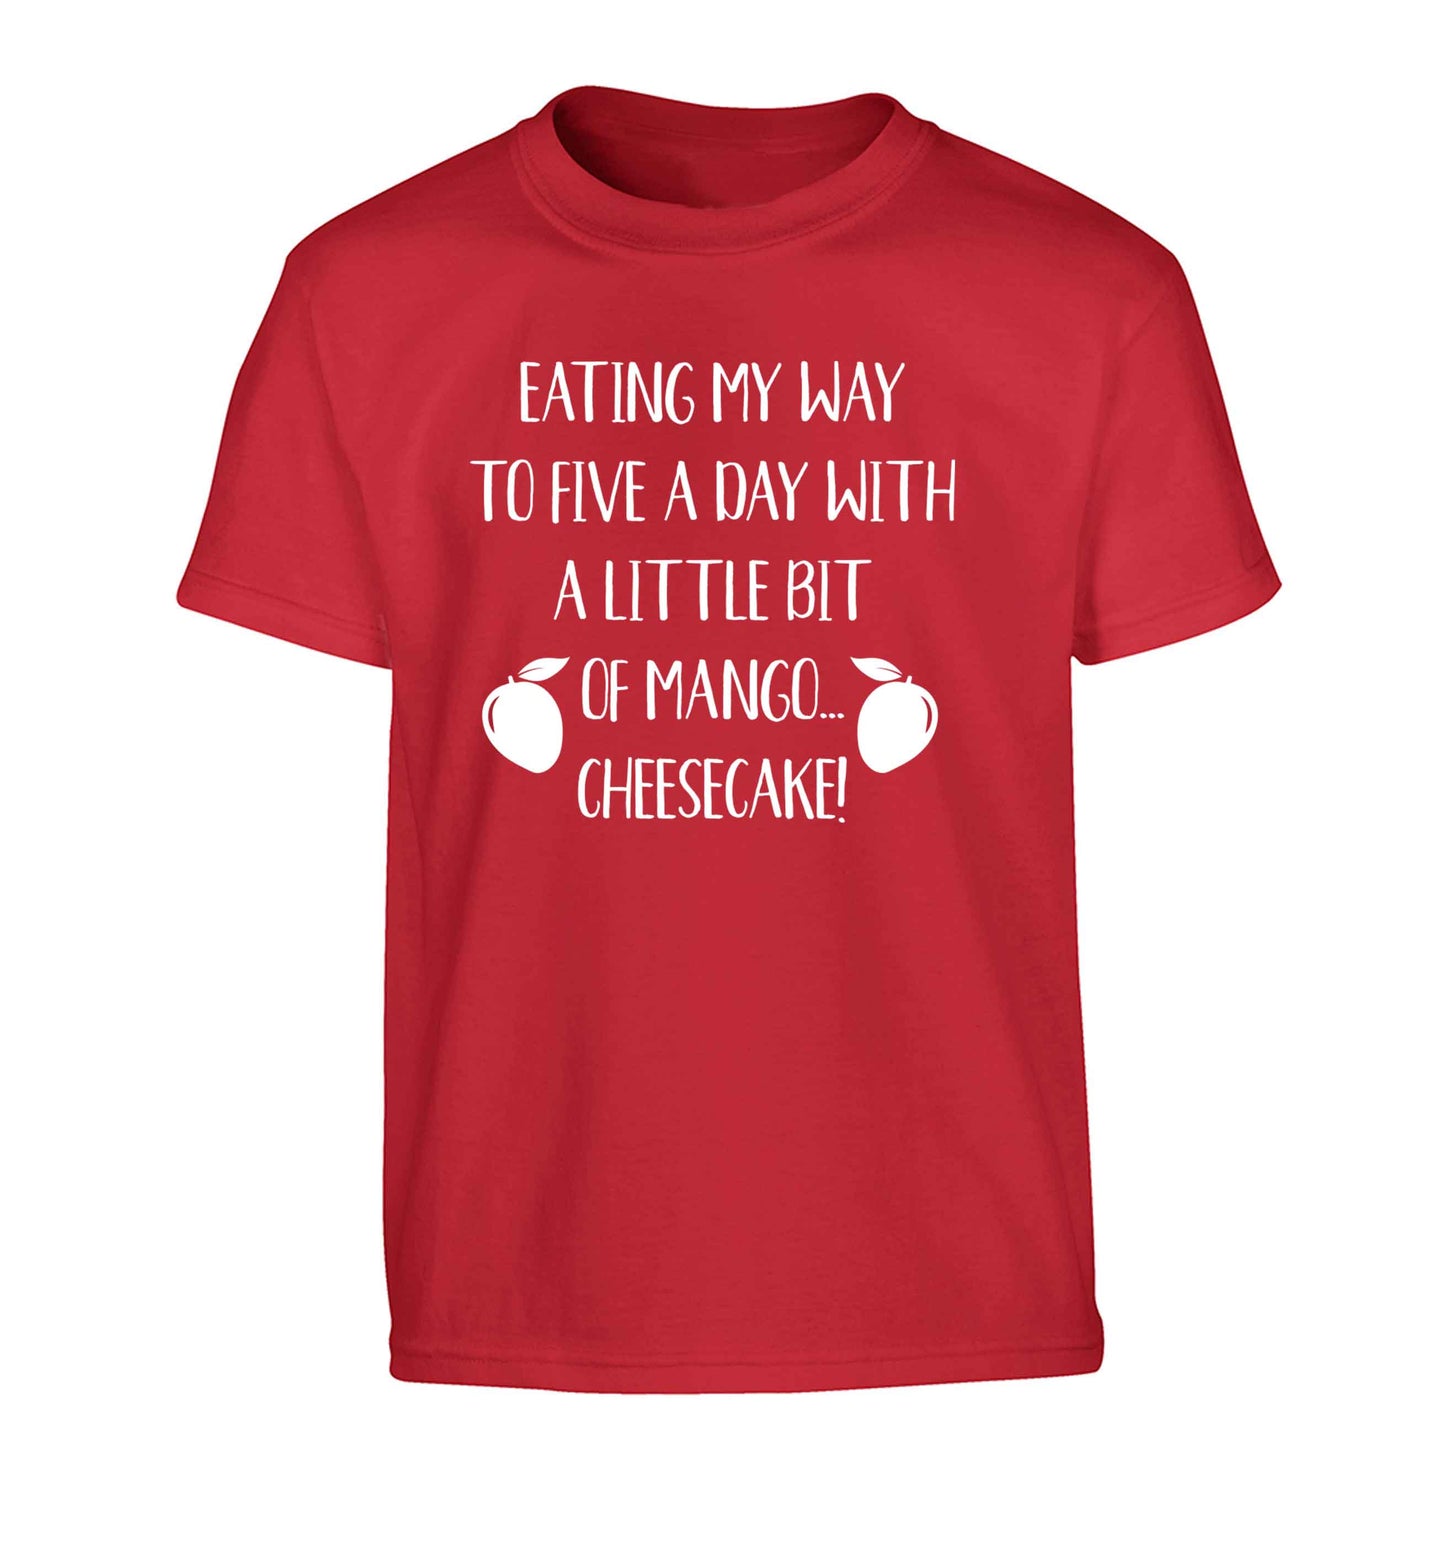 Eating my way to five a day with a little bit of mango cheesecake Children's red Tshirt 12-13 Years